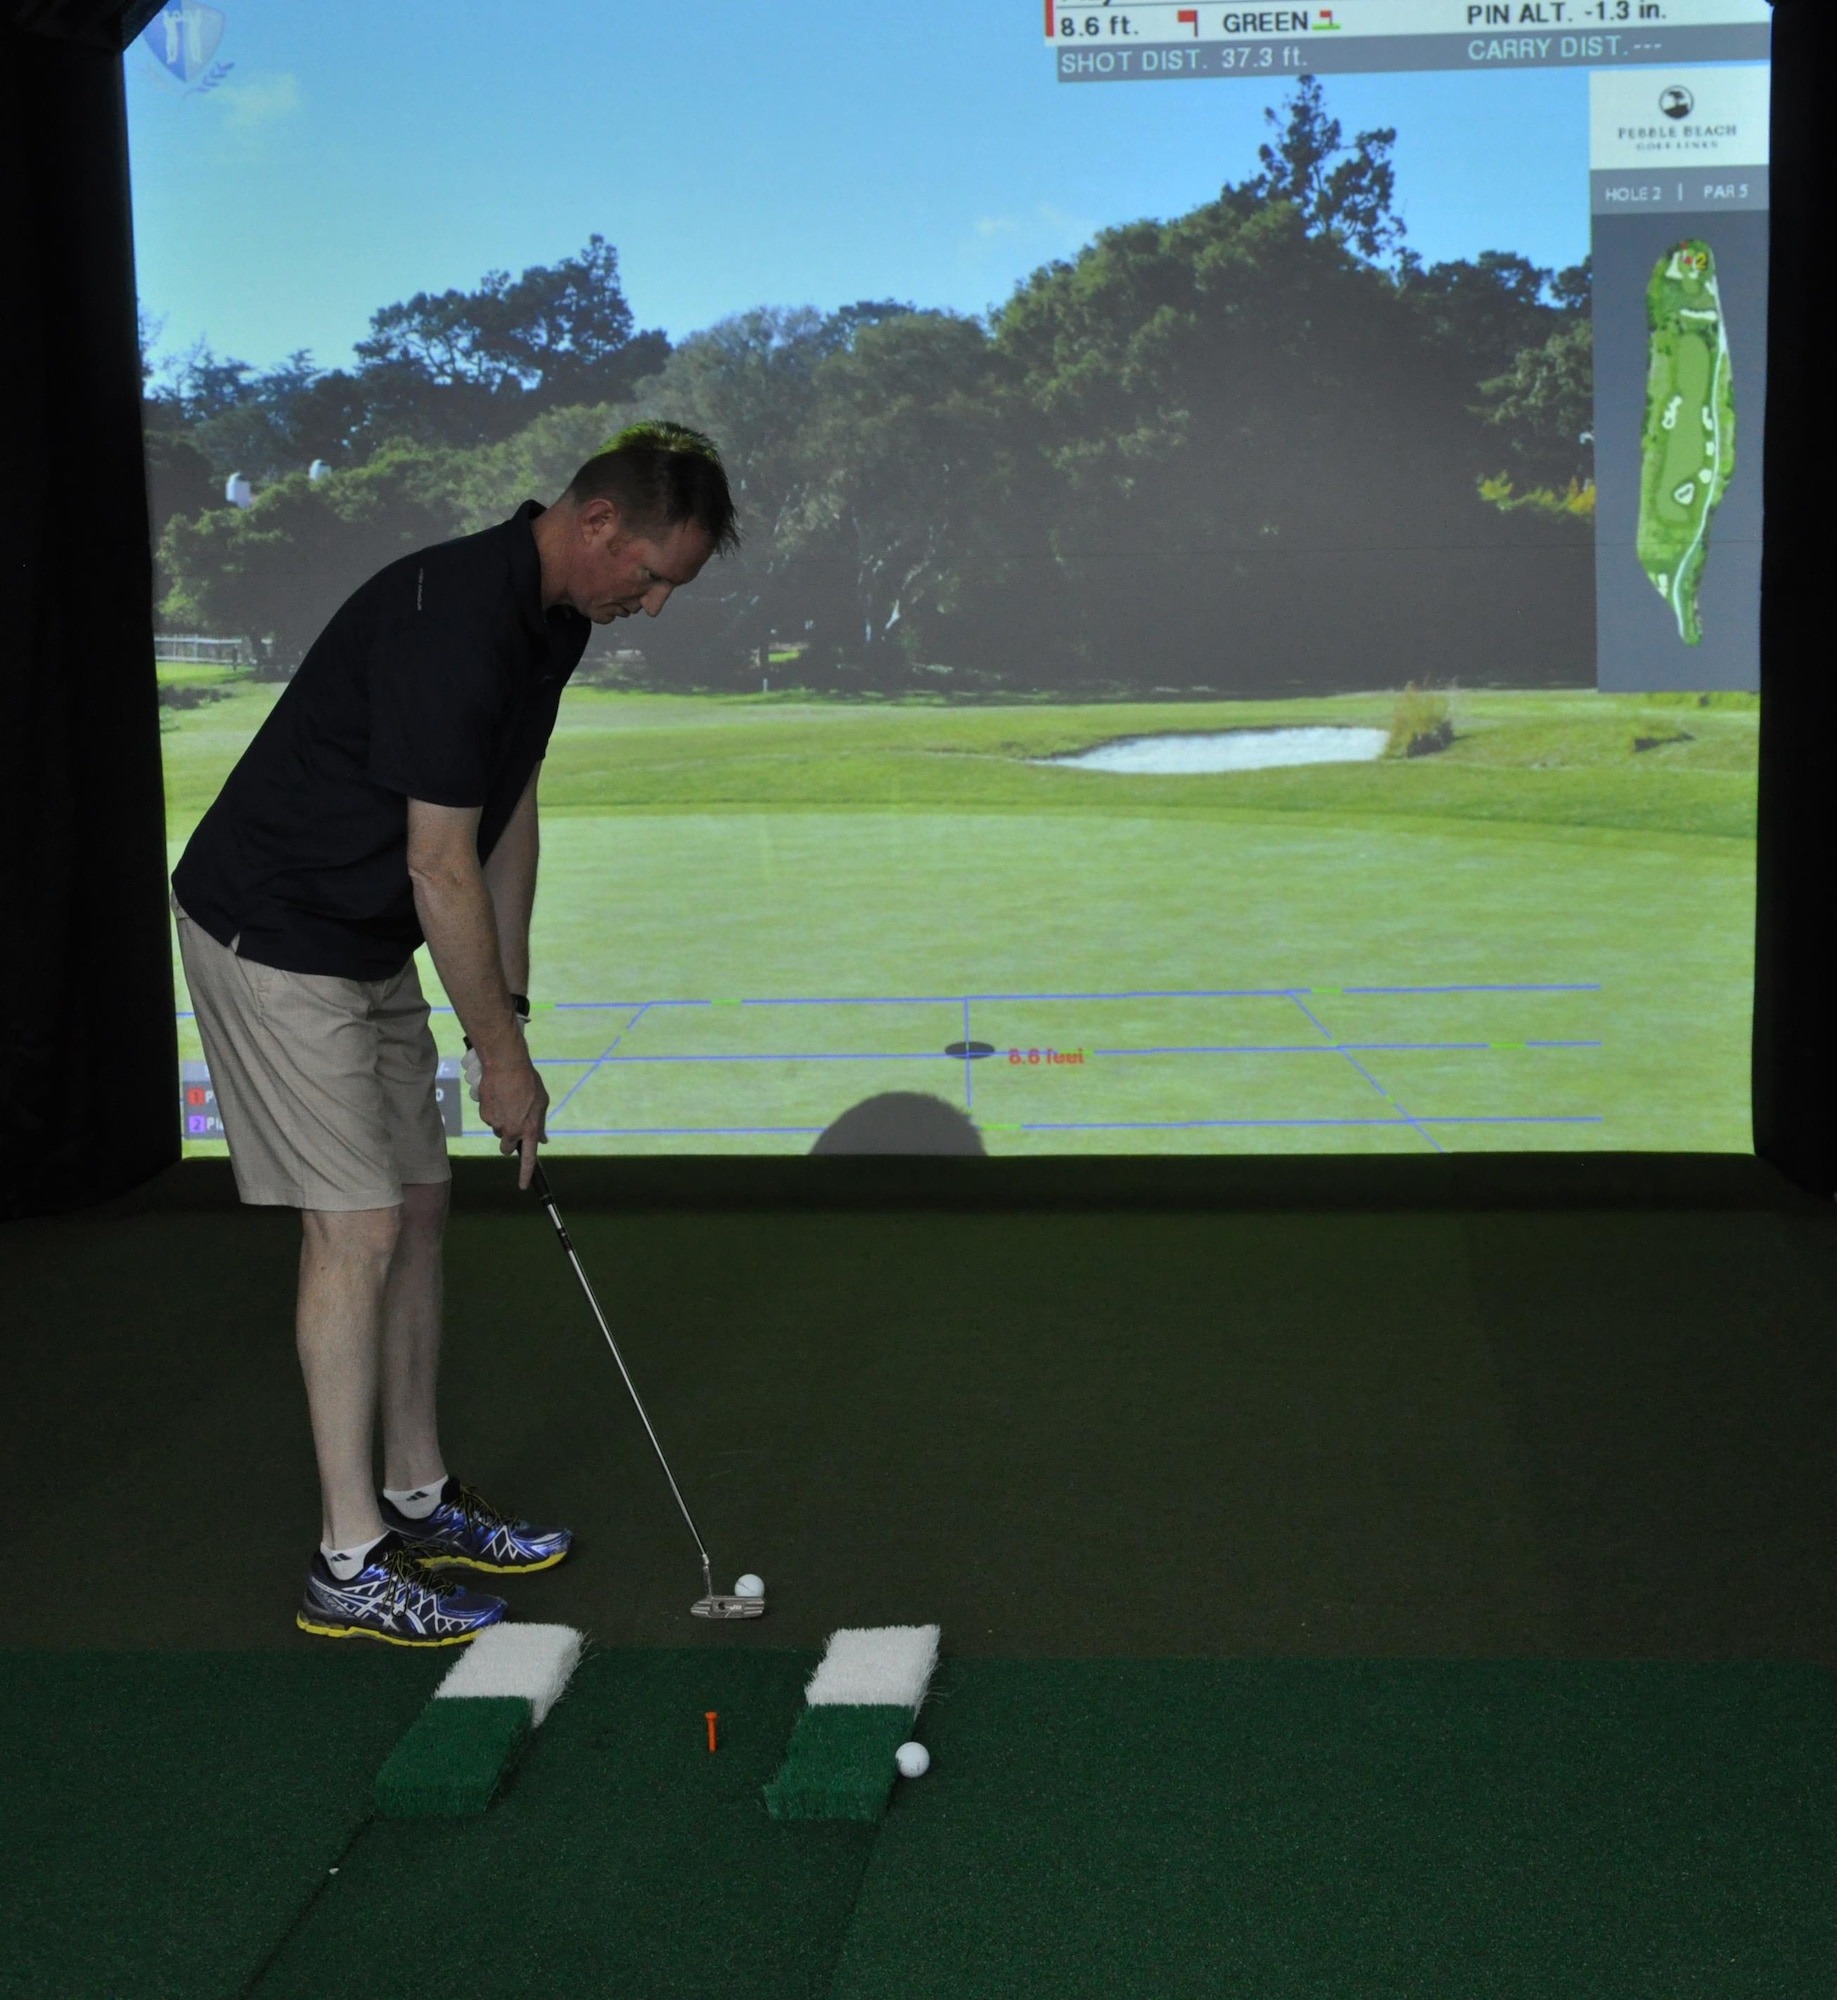 Feje Modernisering rustfri Golf simulator opens at AUAB > U.S. Air Forces Central > Article Display